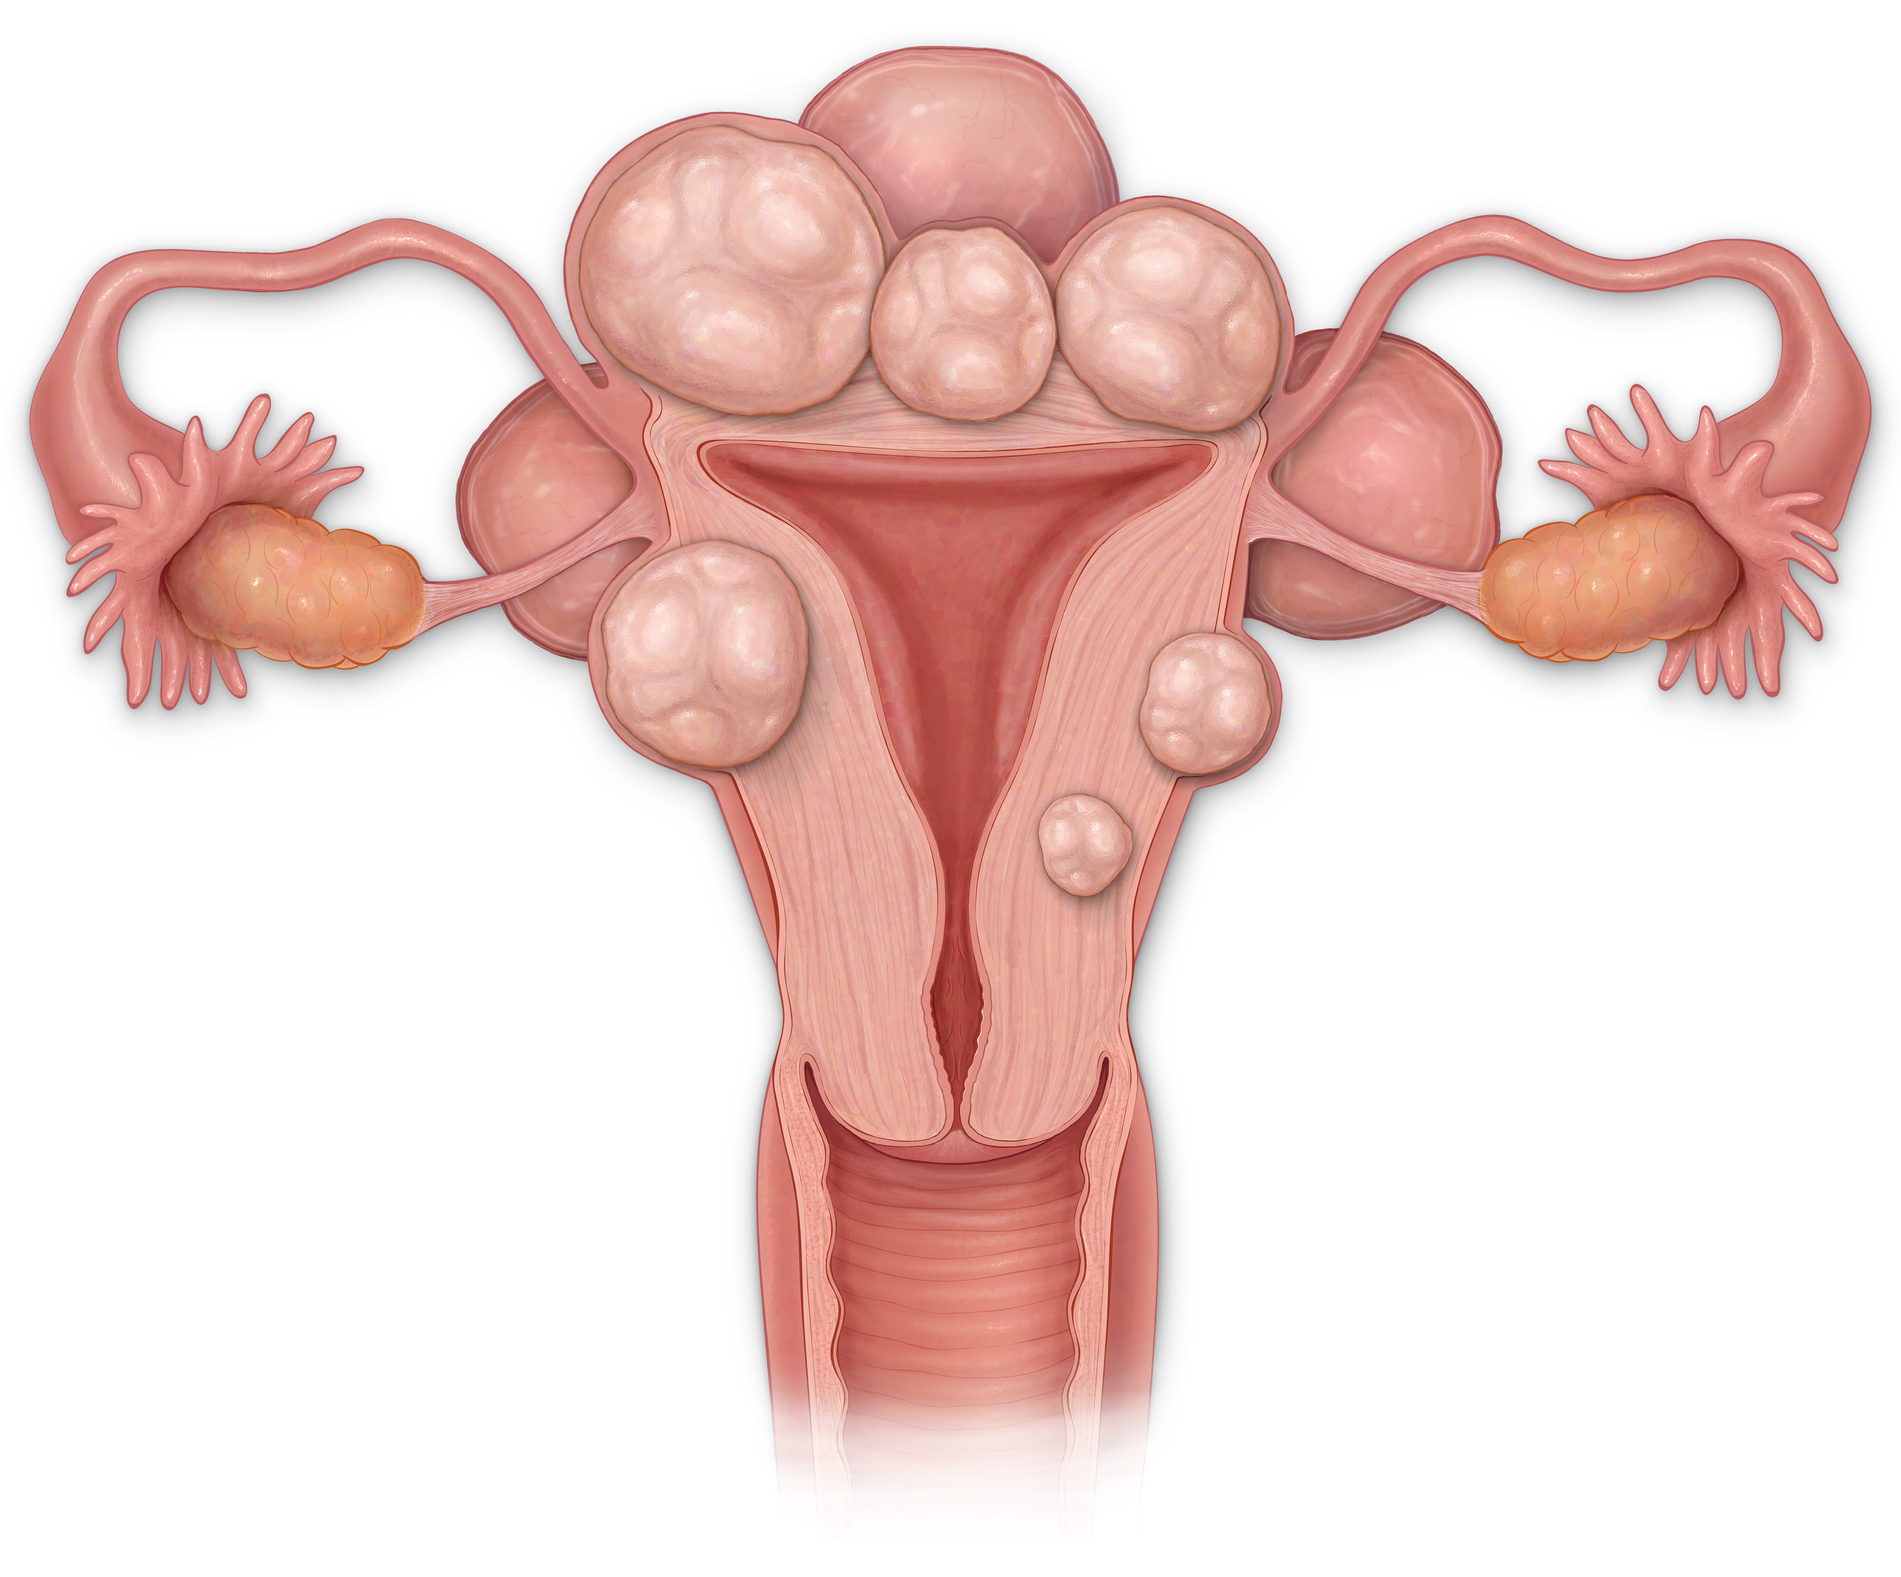 Female anterior cross sectional view of a uterus with fibroids, vagina, cervix, fallopian tubes and ovaries